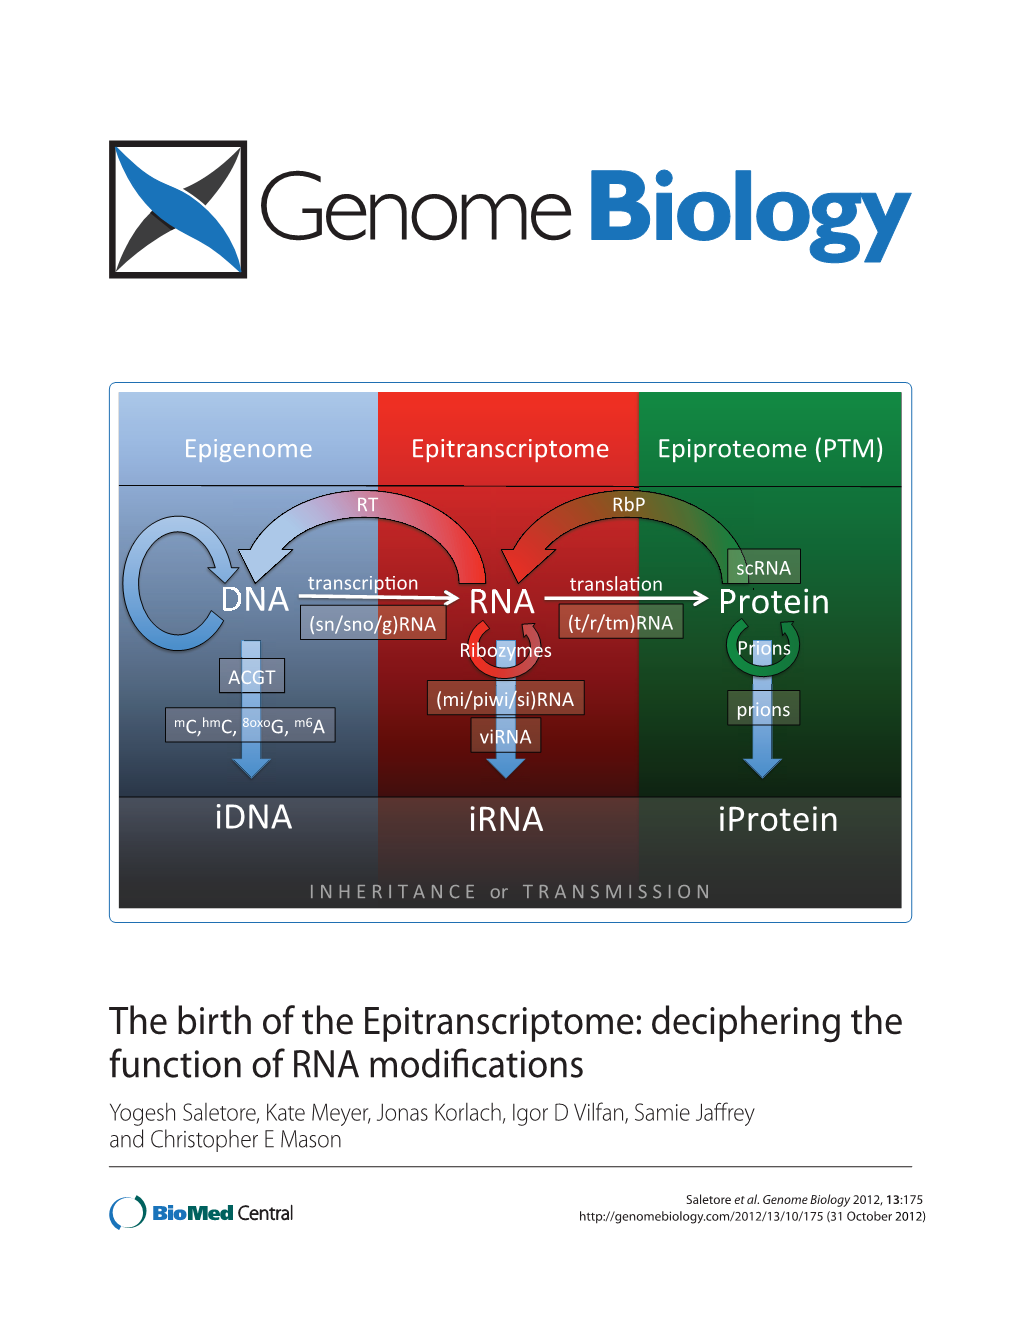 The Birth of the Epitranscriptome: Deciphering the Function of RNA